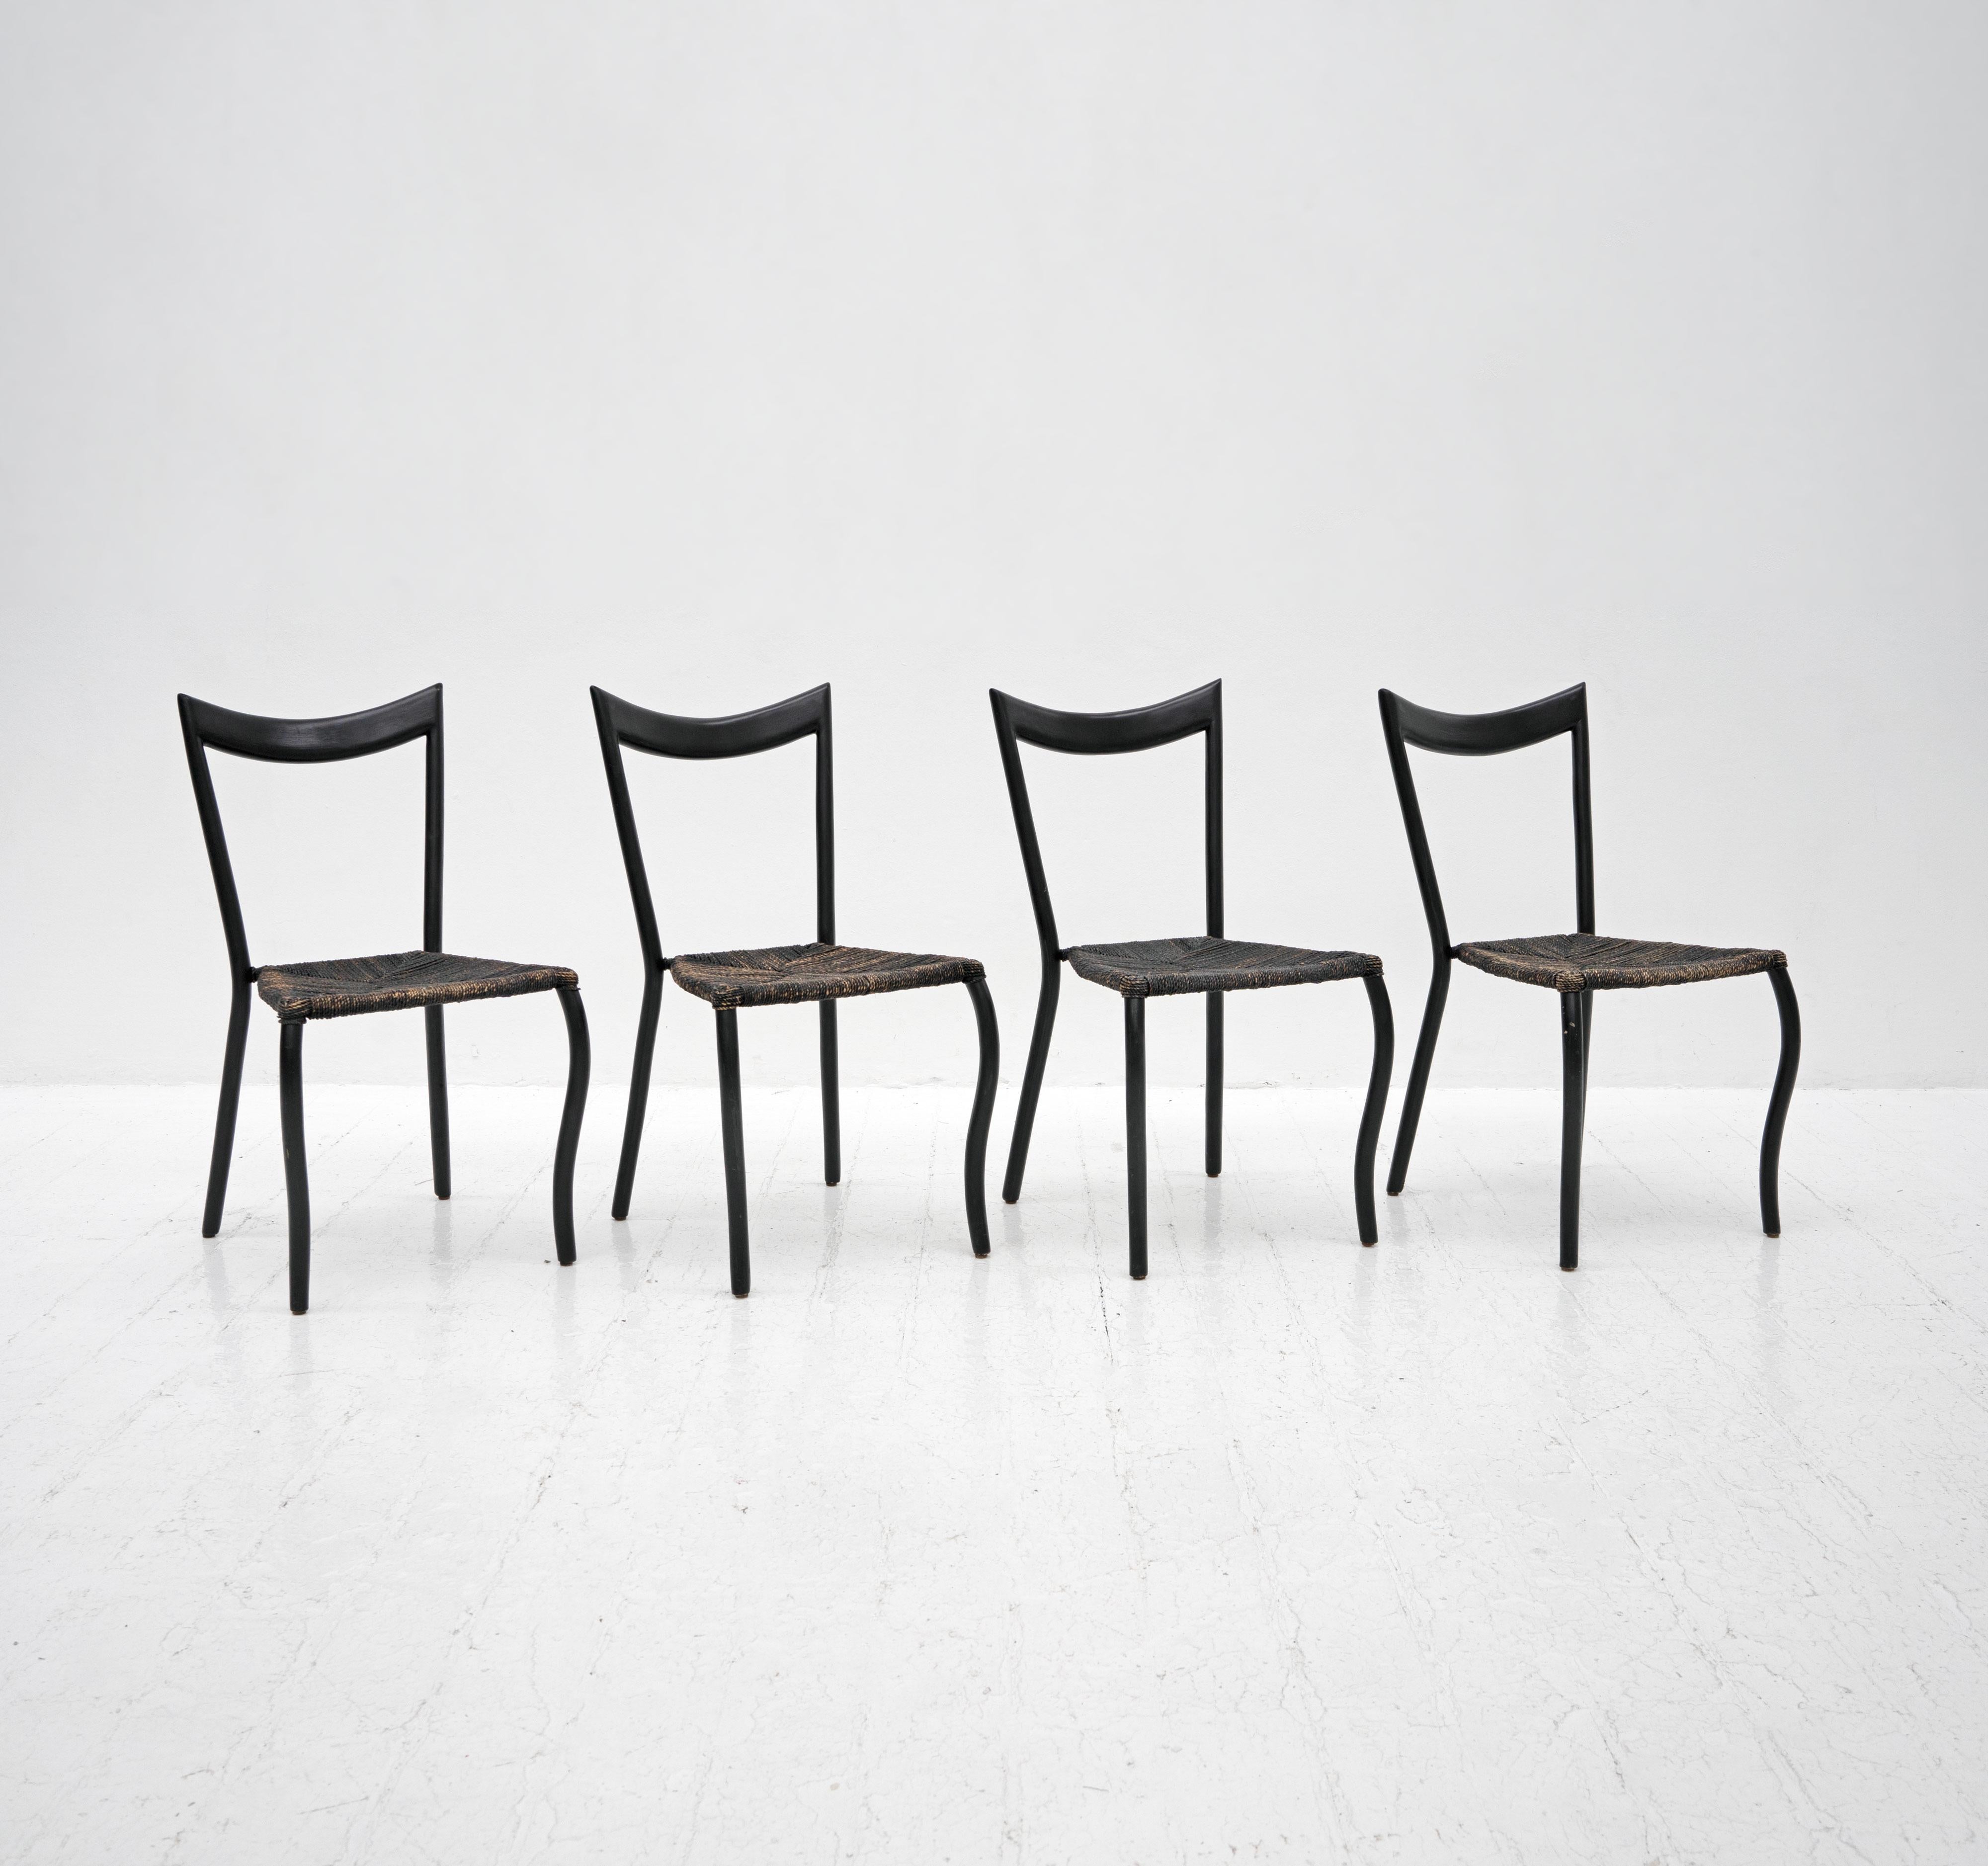 A set of 4 'Manila' dining chairs designed by Val Padilla and retailed by Conran in the 1980's. Composed from black lacquered wooden frames and woven, stained seagrass seats. 

Dimensions (cm, approx):
Height: 89
Width: 53
Depth: 57
